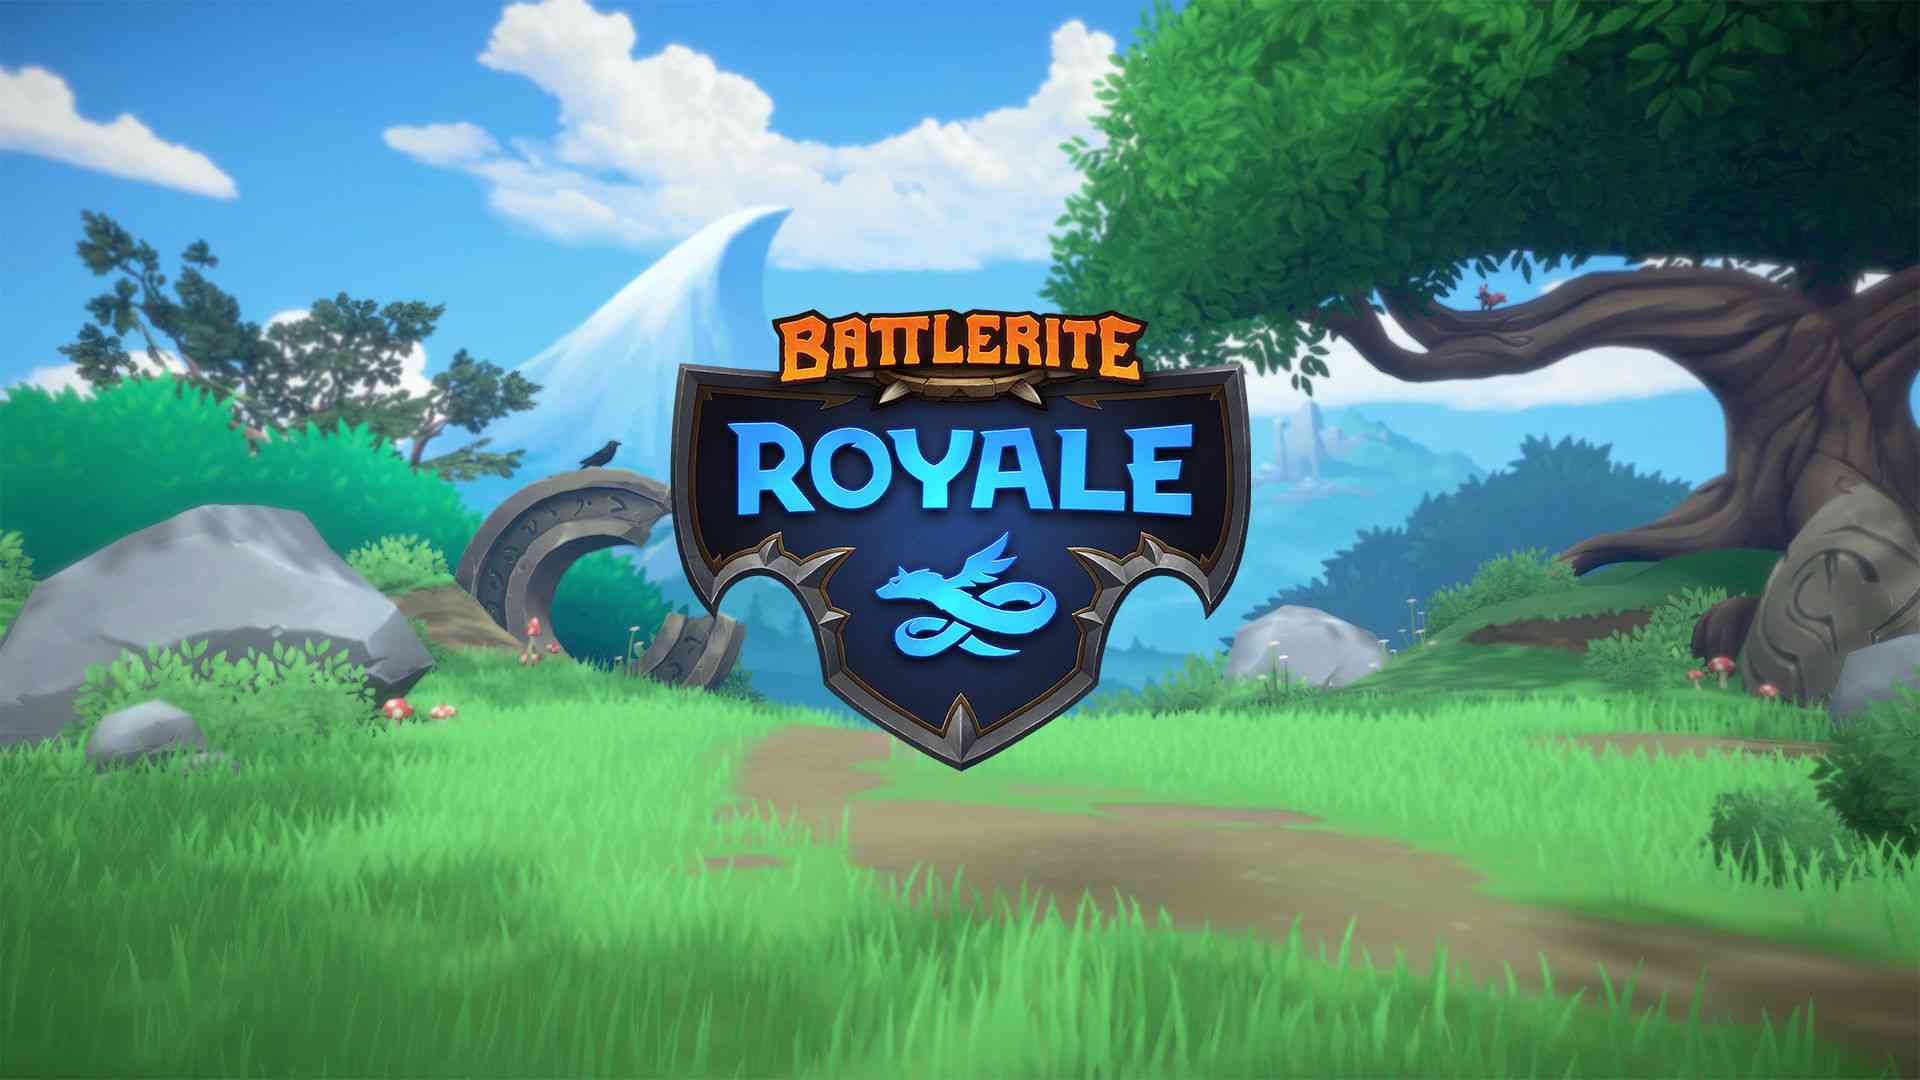 battlerite royale free to play launch trailer released 1657 big 1